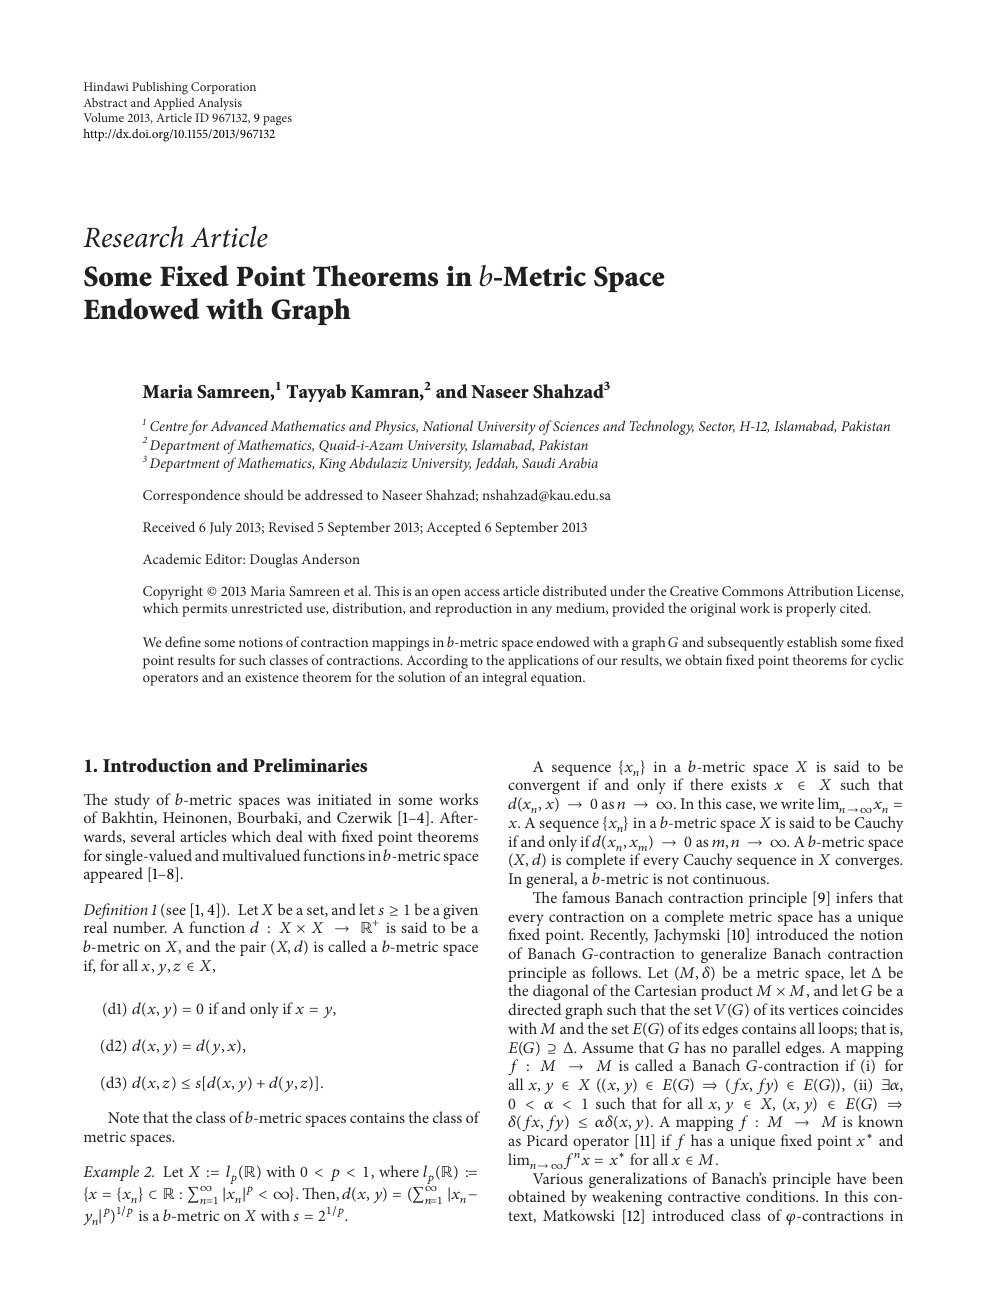 Some Fixed Point Theorems In Metric Space Endowed With Graph Topic Of Research Paper In Mathematics Download Scholarly Article Pdf And Read For Free On Cyberleninka Open Science Hub